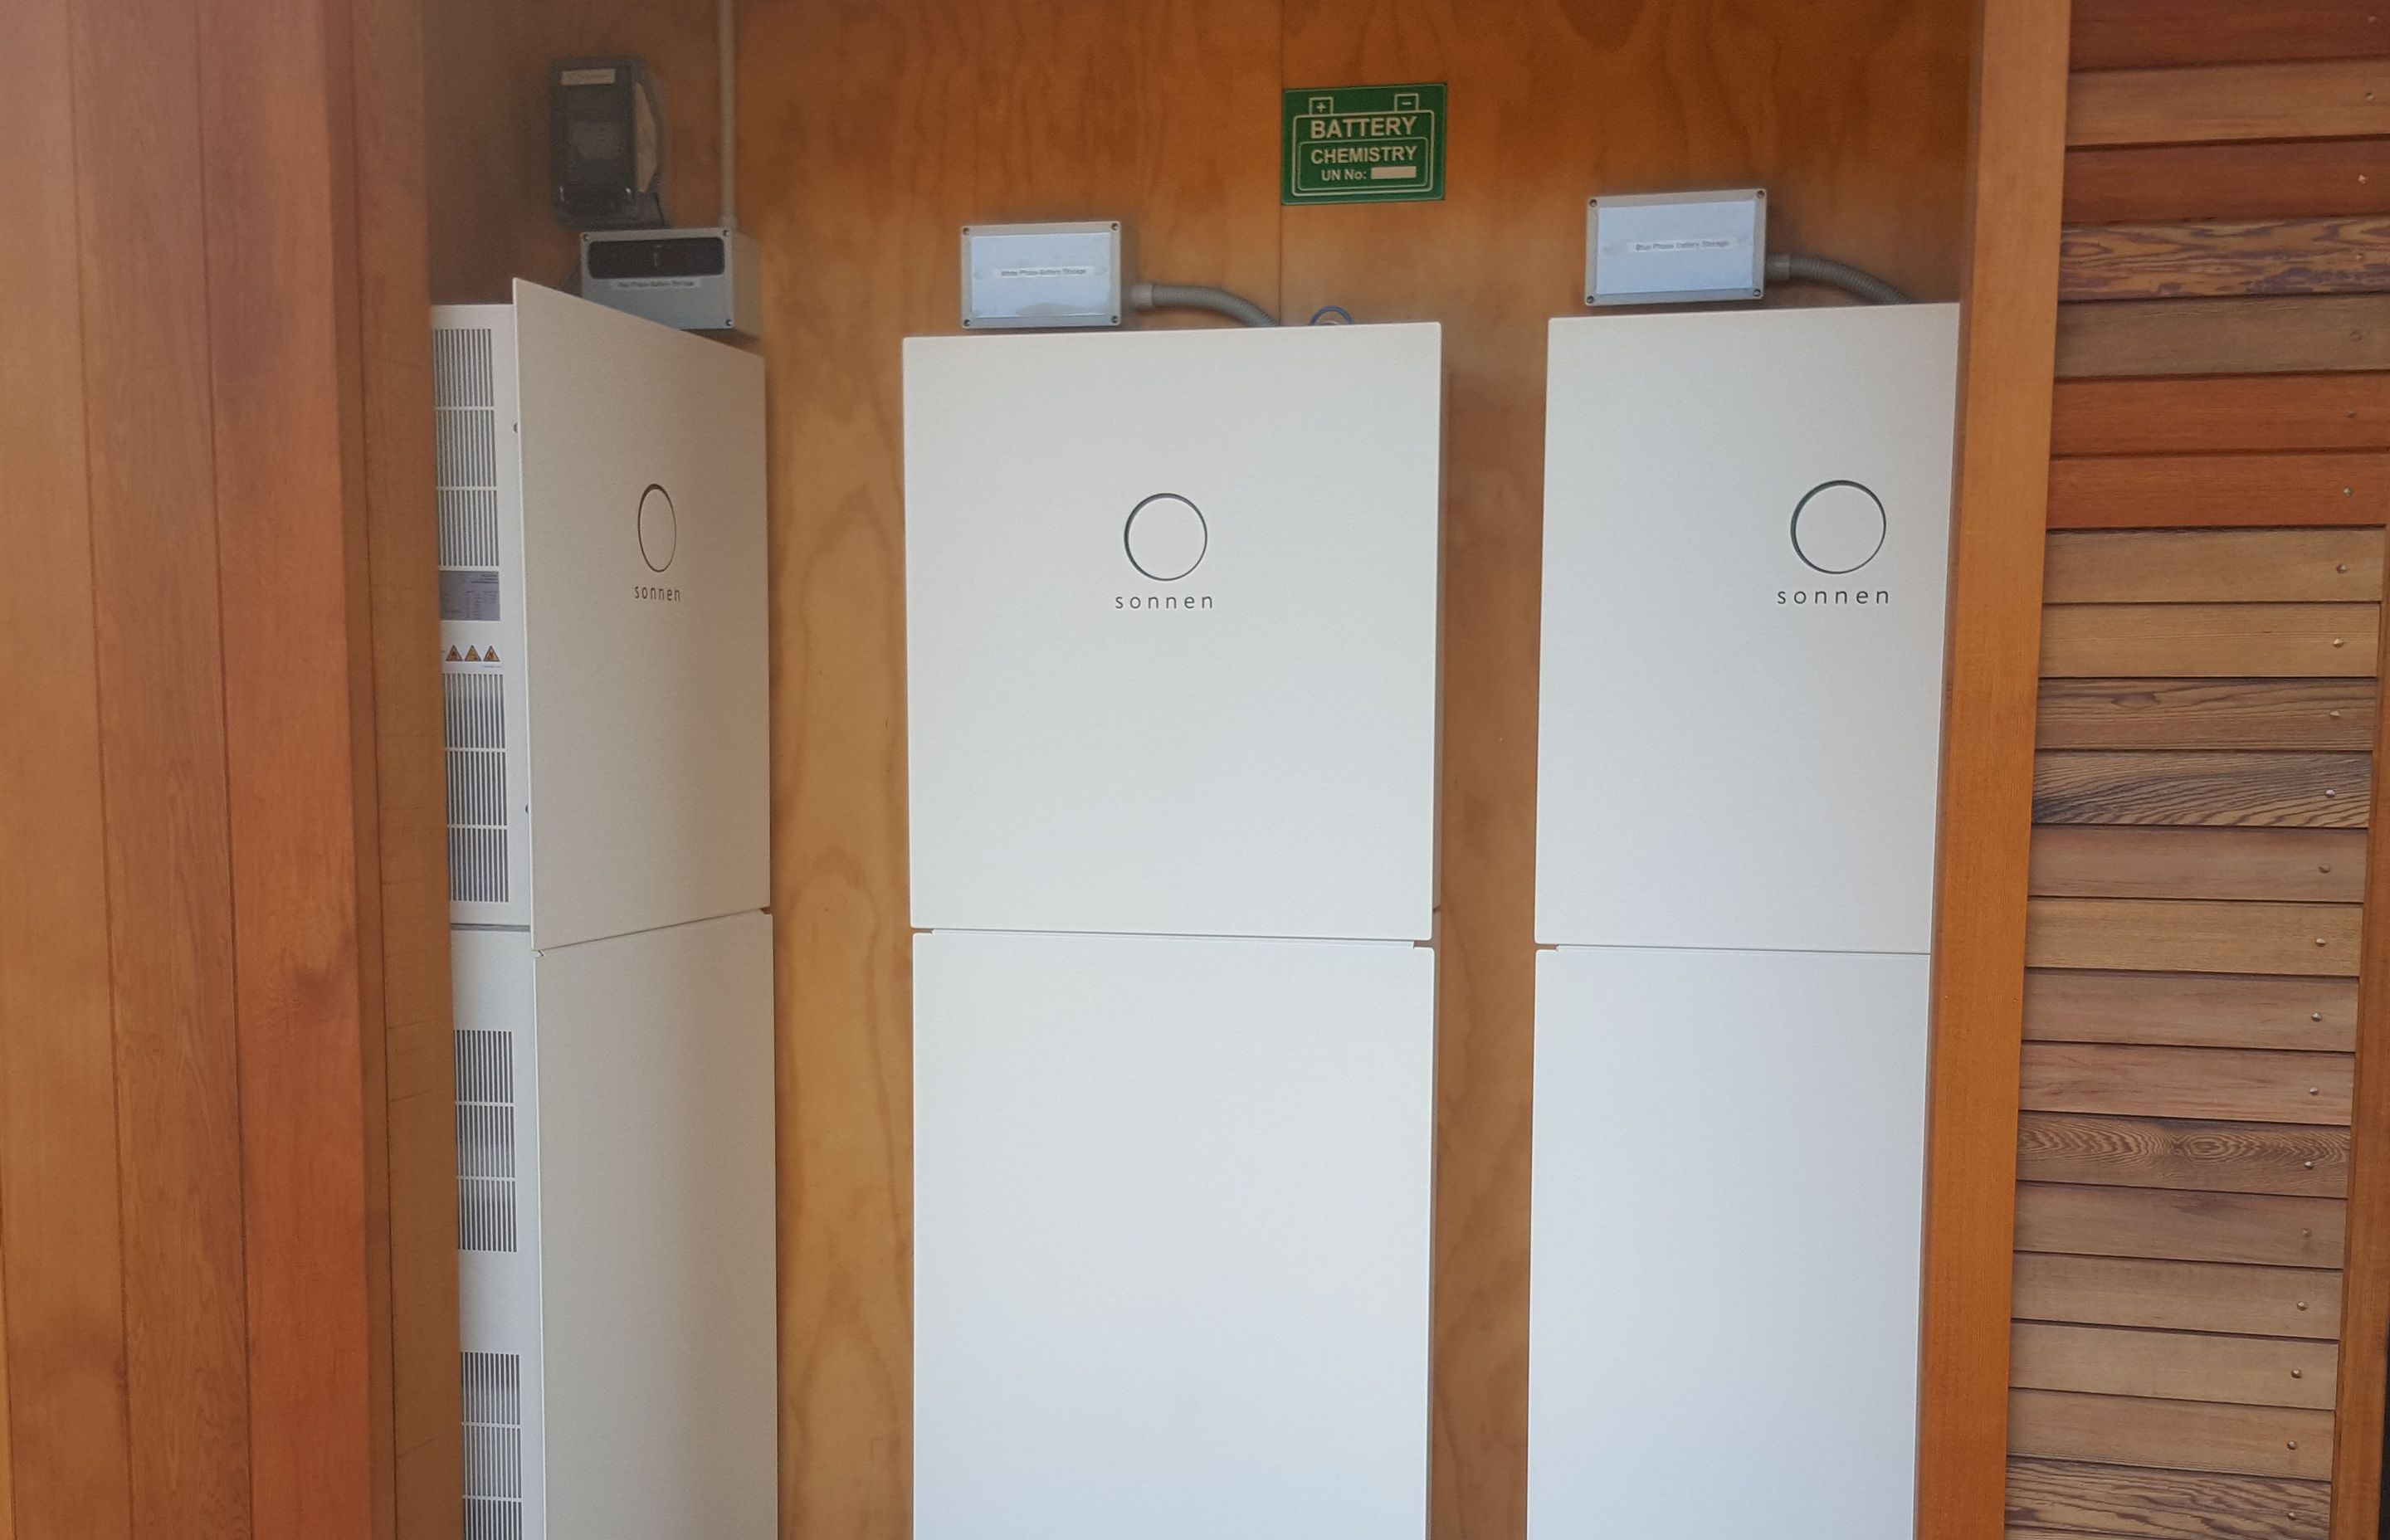 These Sonnen self-consumption batteries, set up in a three phase system, provide renewable energy year round.